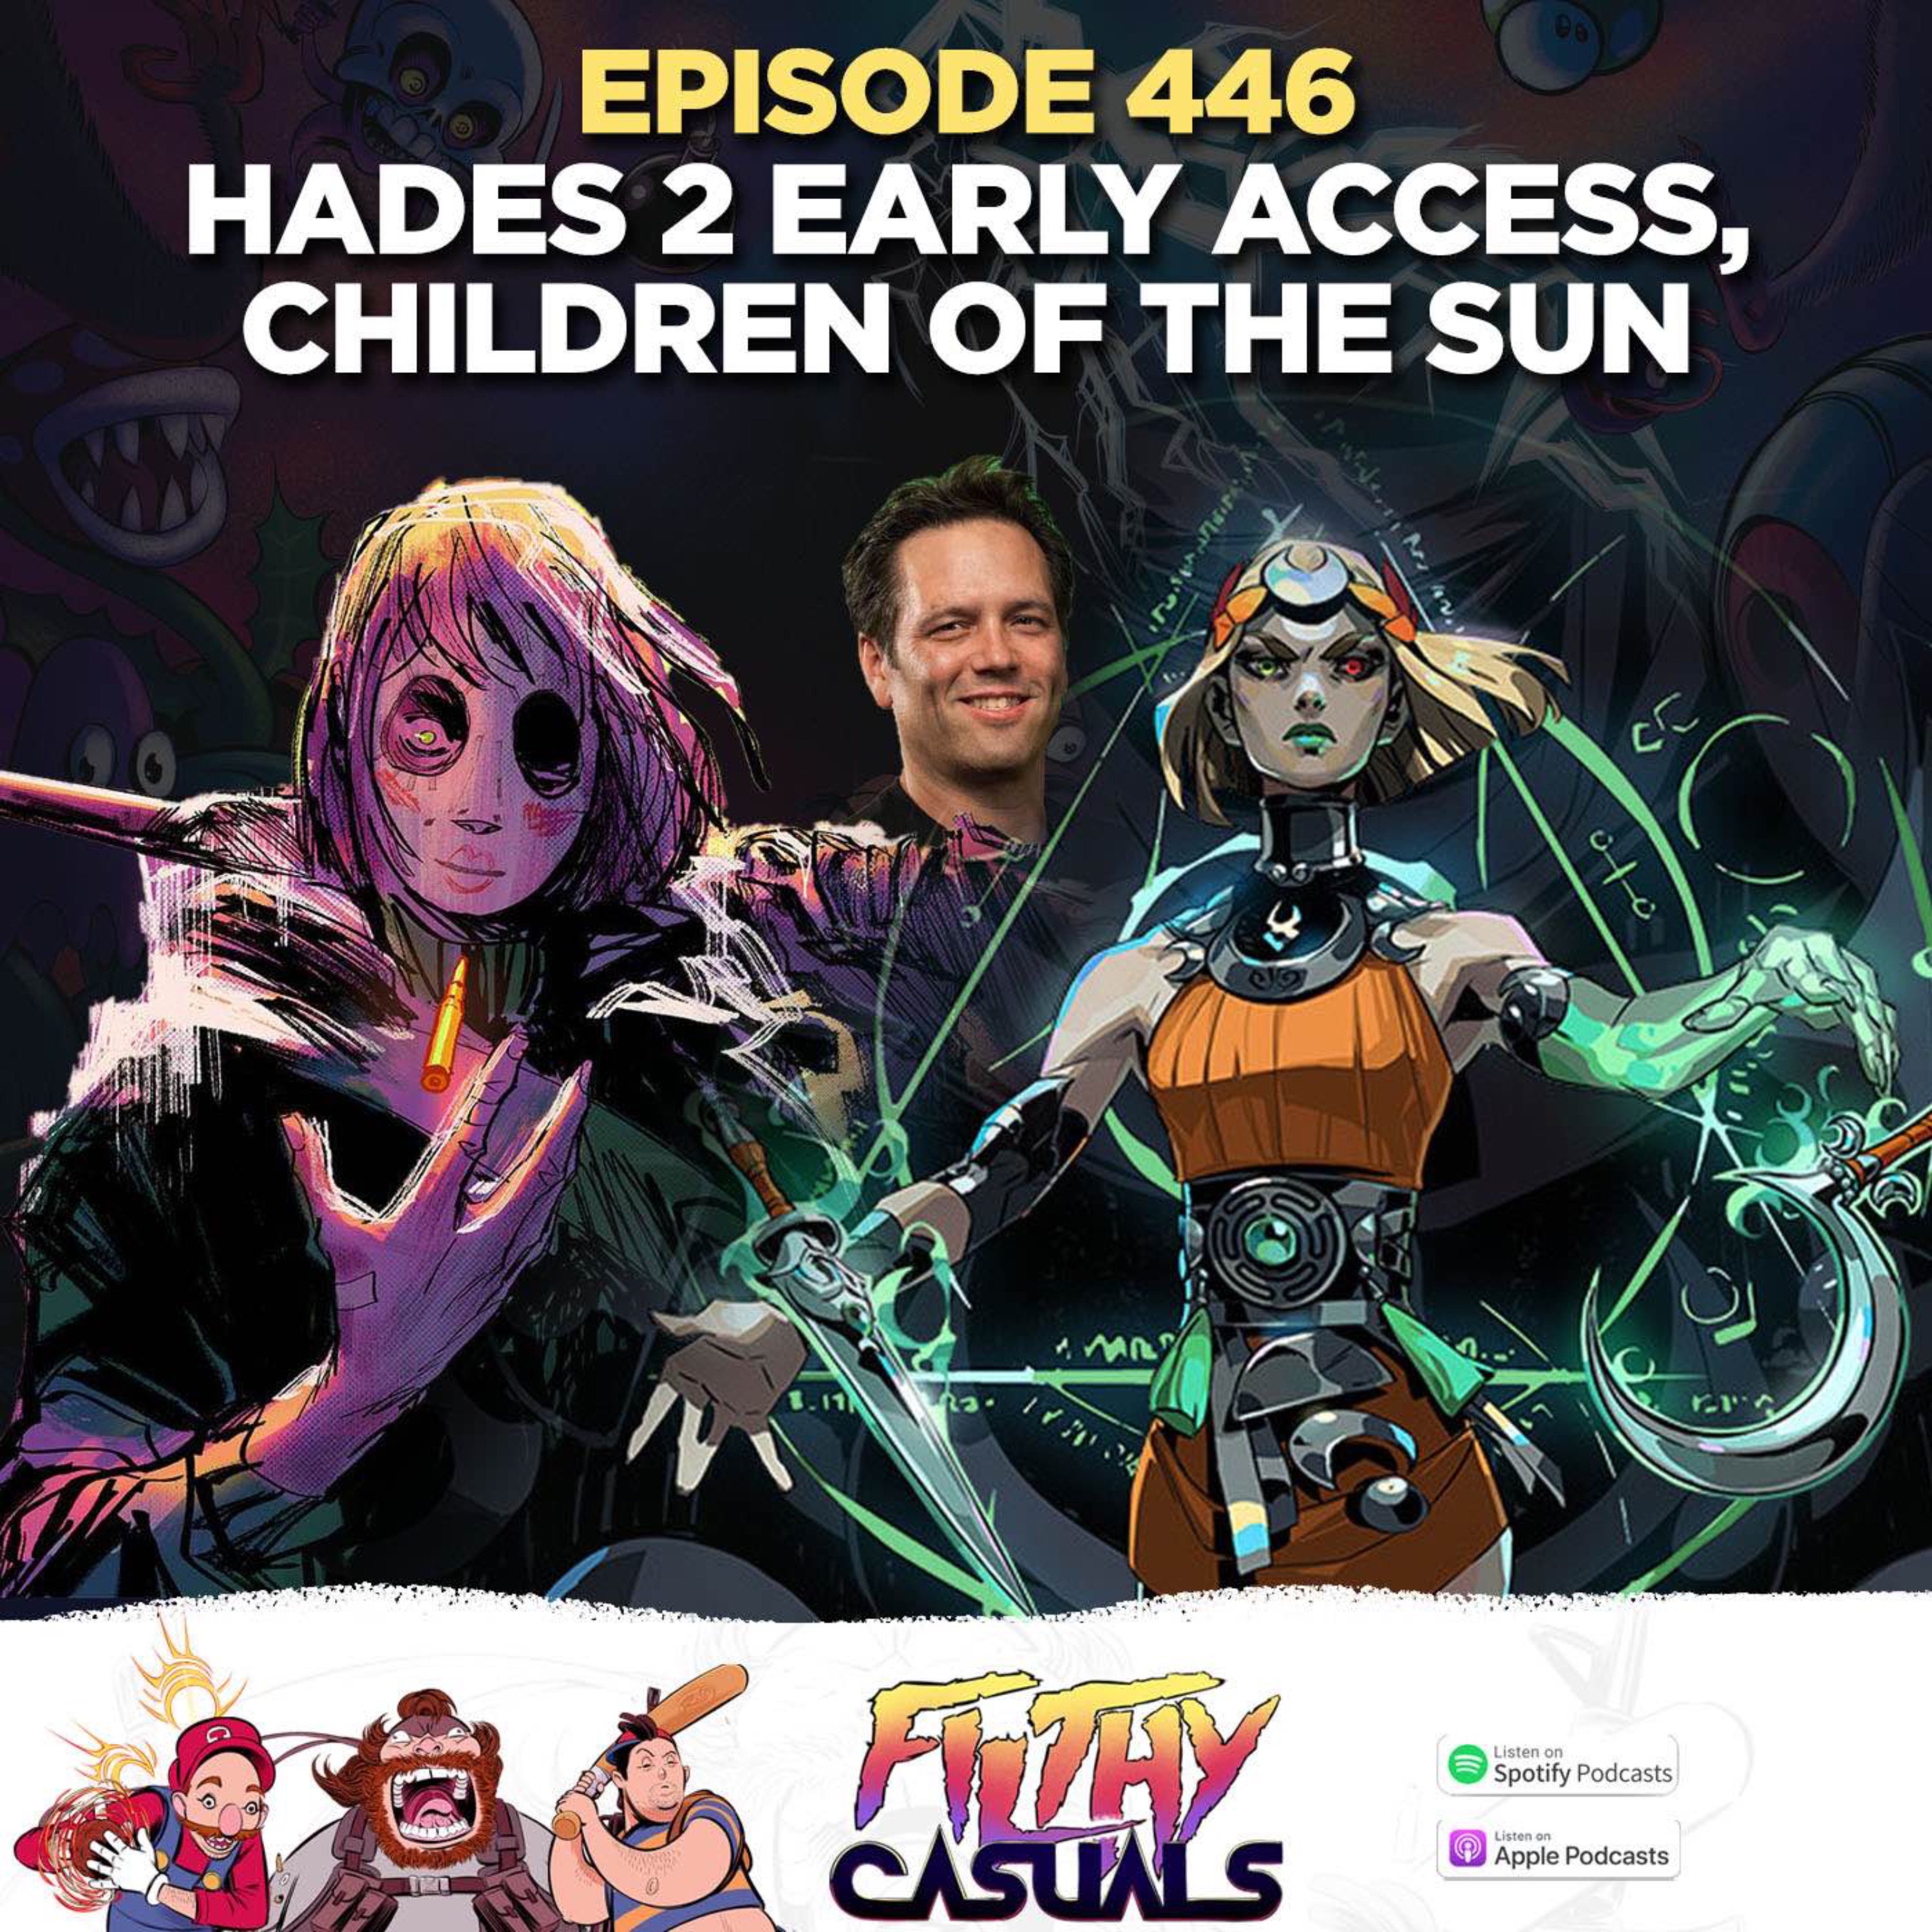 Episode 446: Hades II Early Access, Children of the Sun